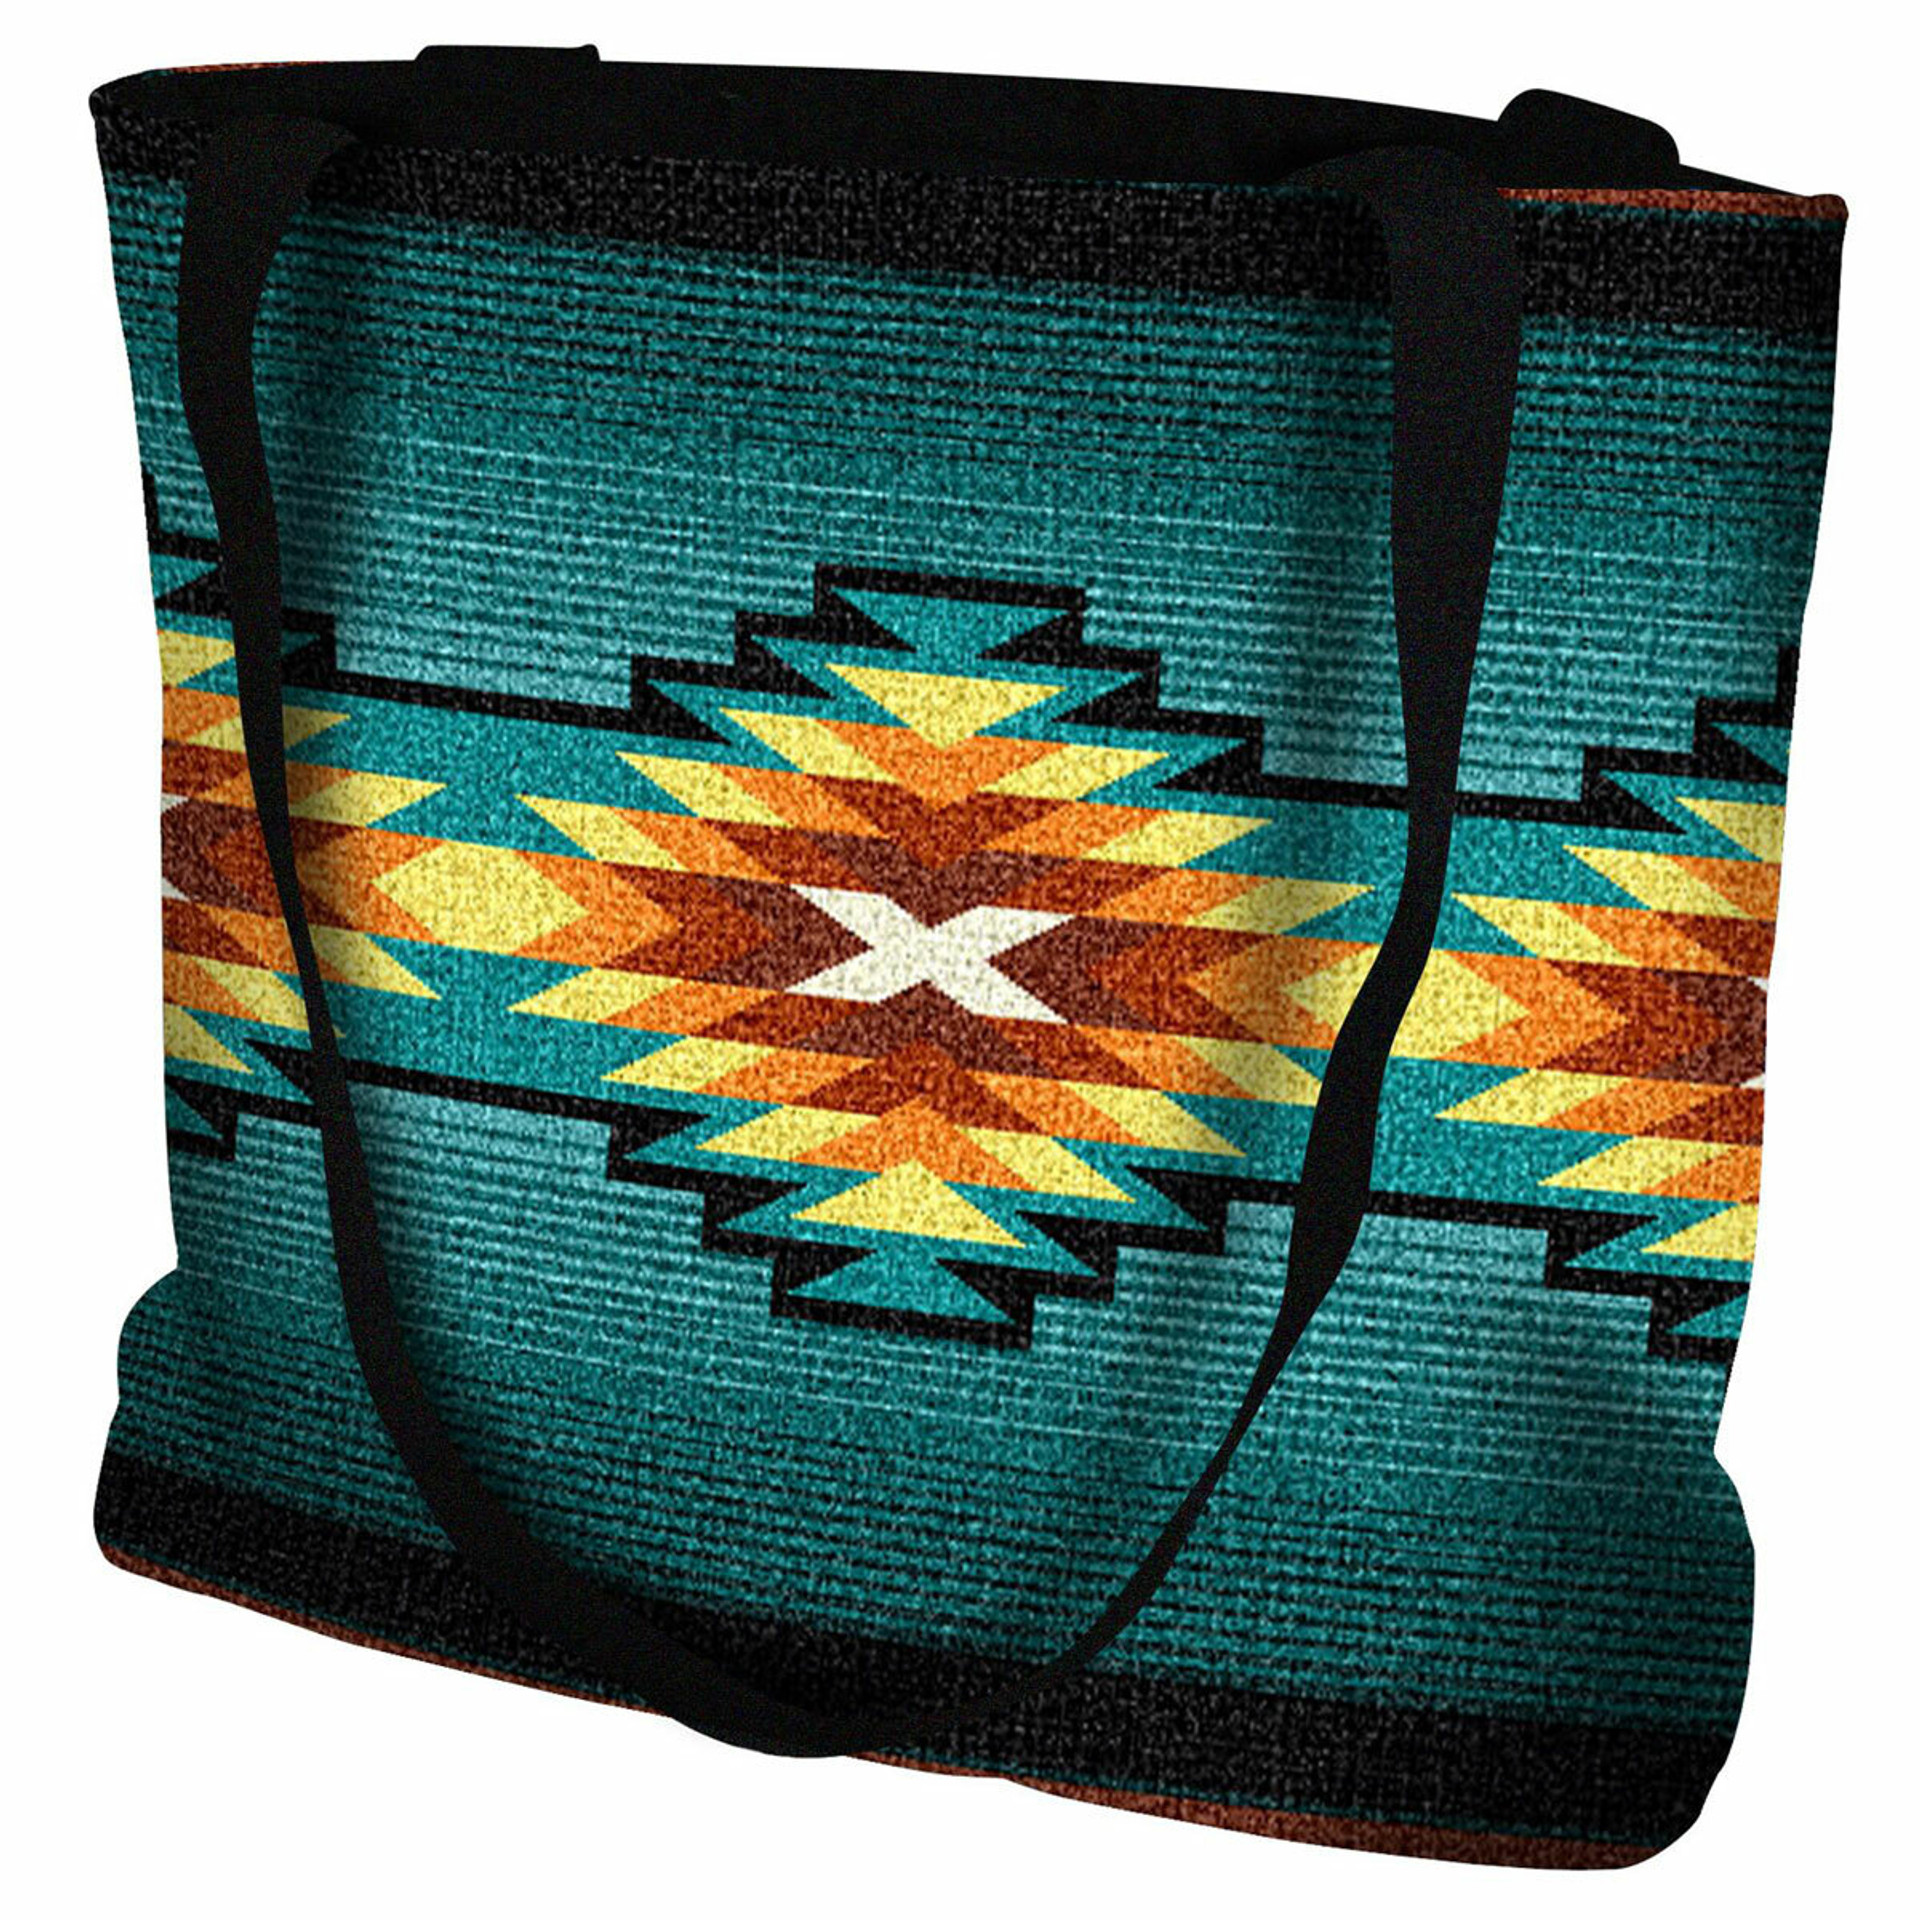 Western Purses and Accessories: Southwest Geometric Turquoise II Tote ...